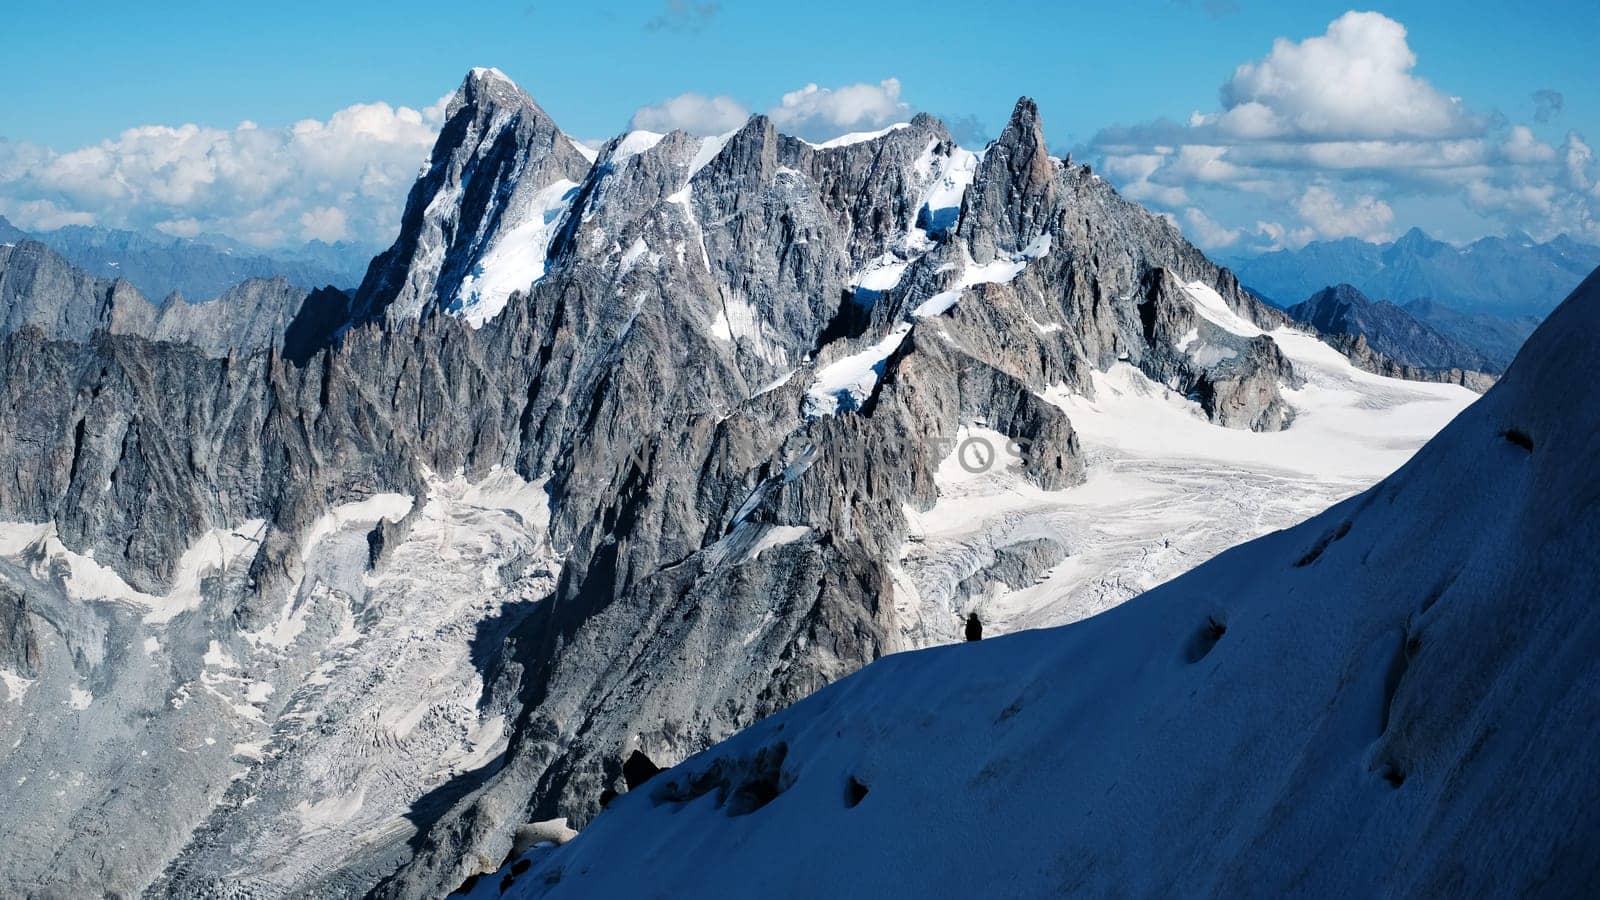 Group Of Alpinists Climbing The Montblanc Snowy Mountain